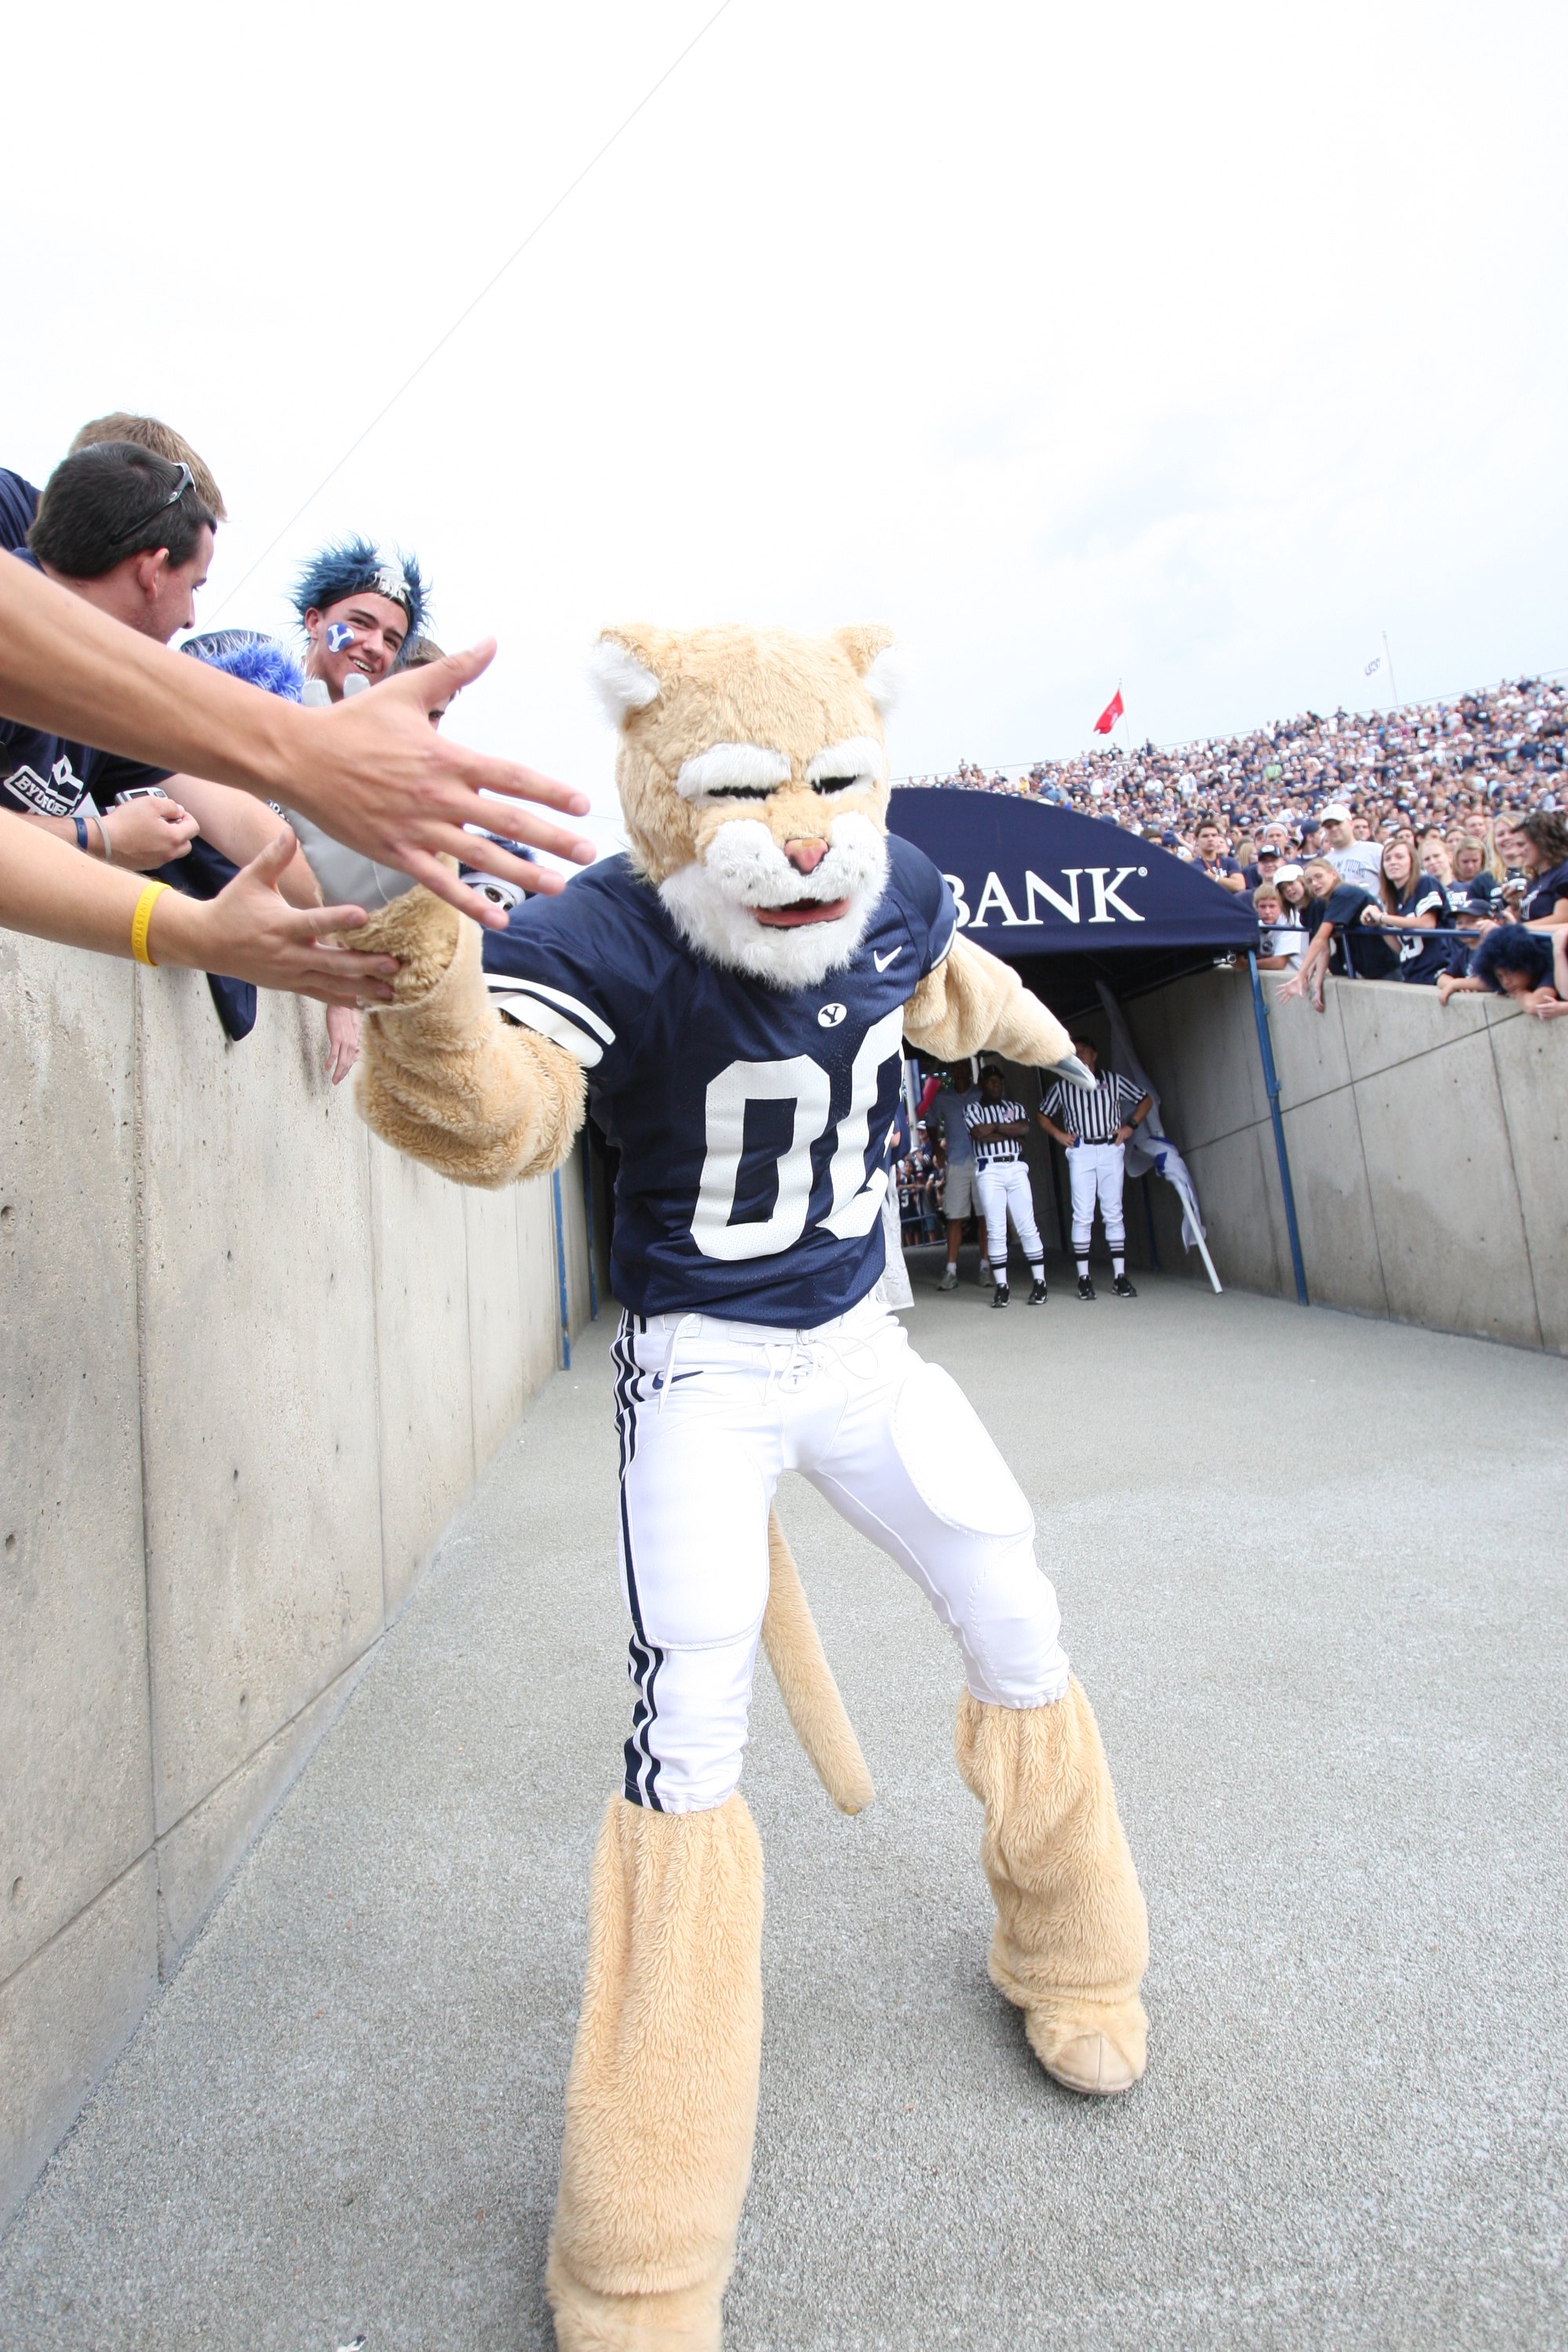 PROVO, UT - SEPTEMBER 19:  Cosmo the mascot of Brigham Young University Cougars gets the fans going before the game against the Florida State Seminoles at La Vell Edwards Stadium on September 19, 2009 in Provo, Utah.  (Photo by Melissa Majchrzak via Getty